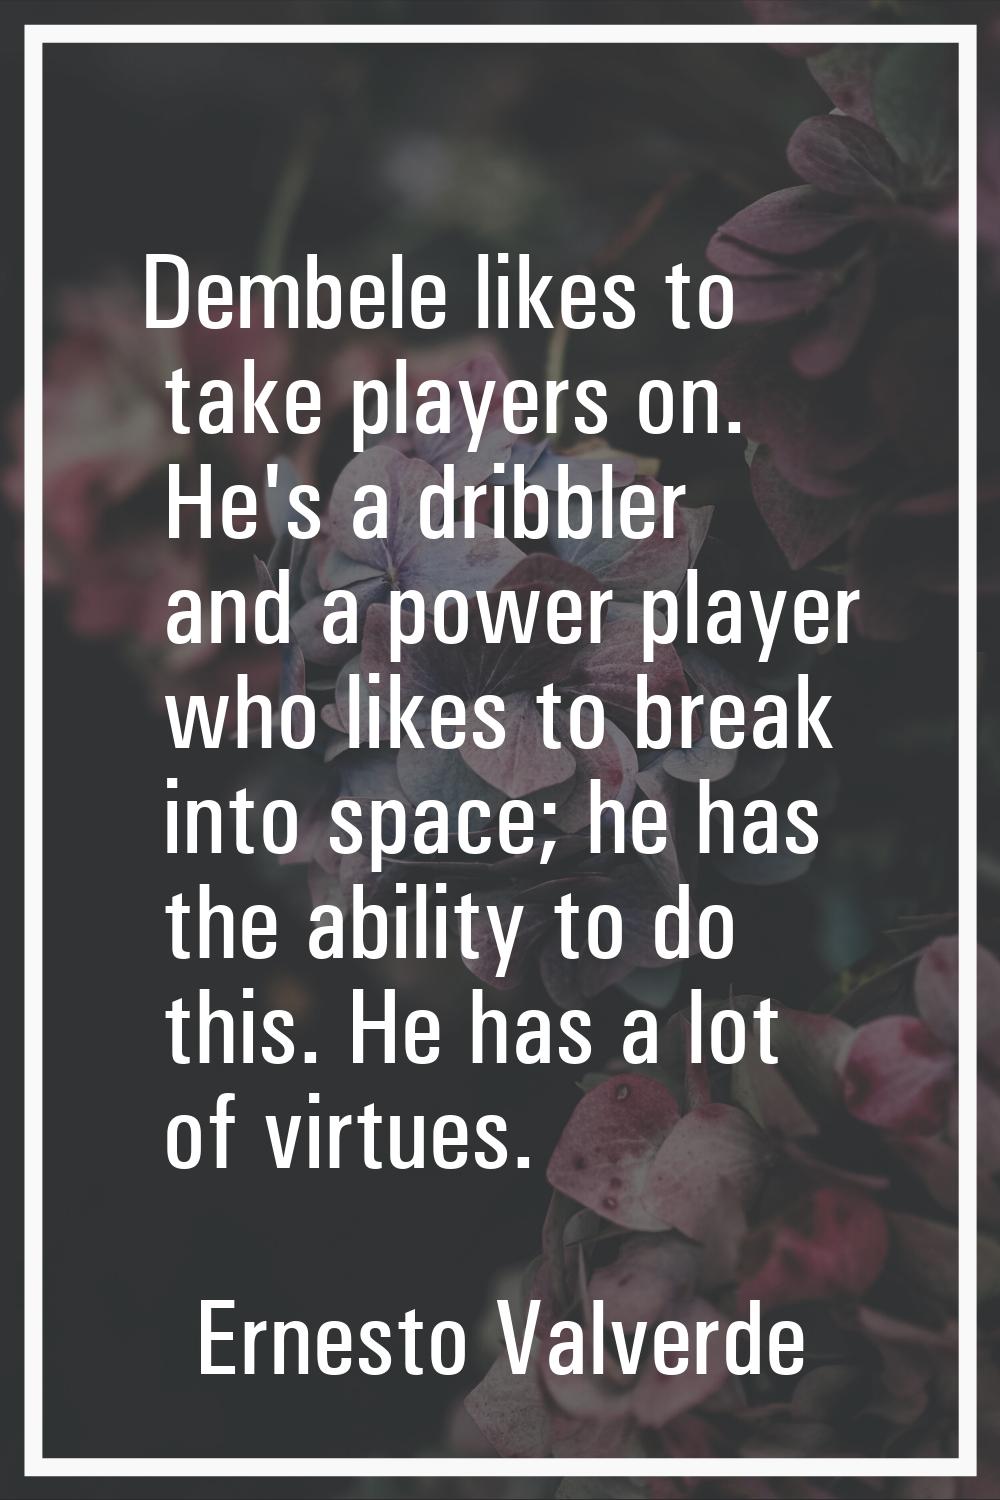 Dembele likes to take players on. He's a dribbler and a power player who likes to break into space;